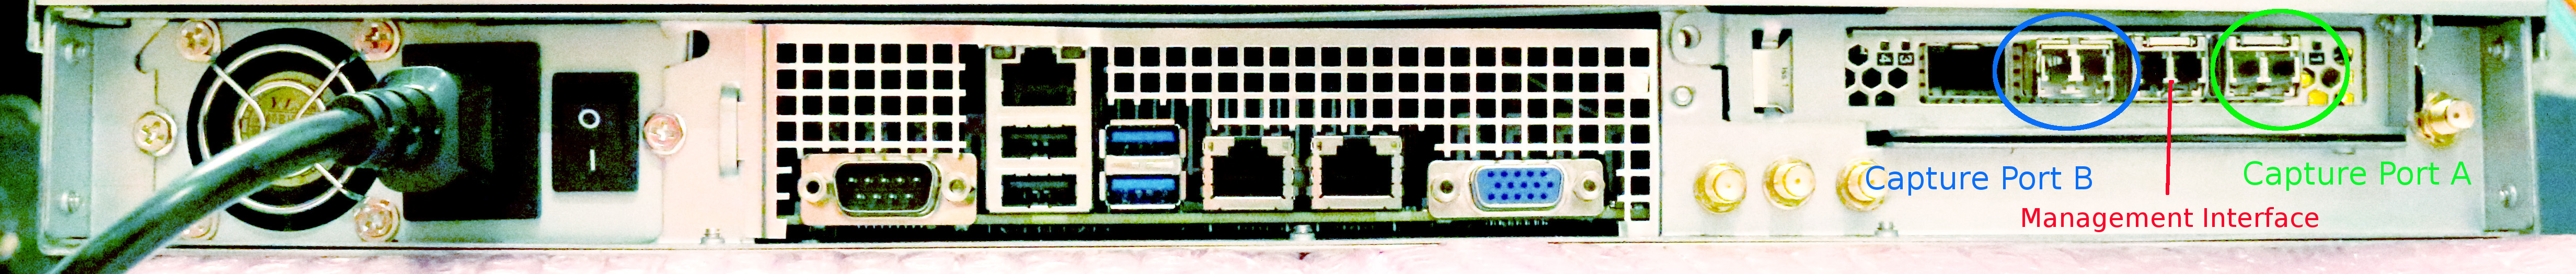 20g packet capture chassis rear